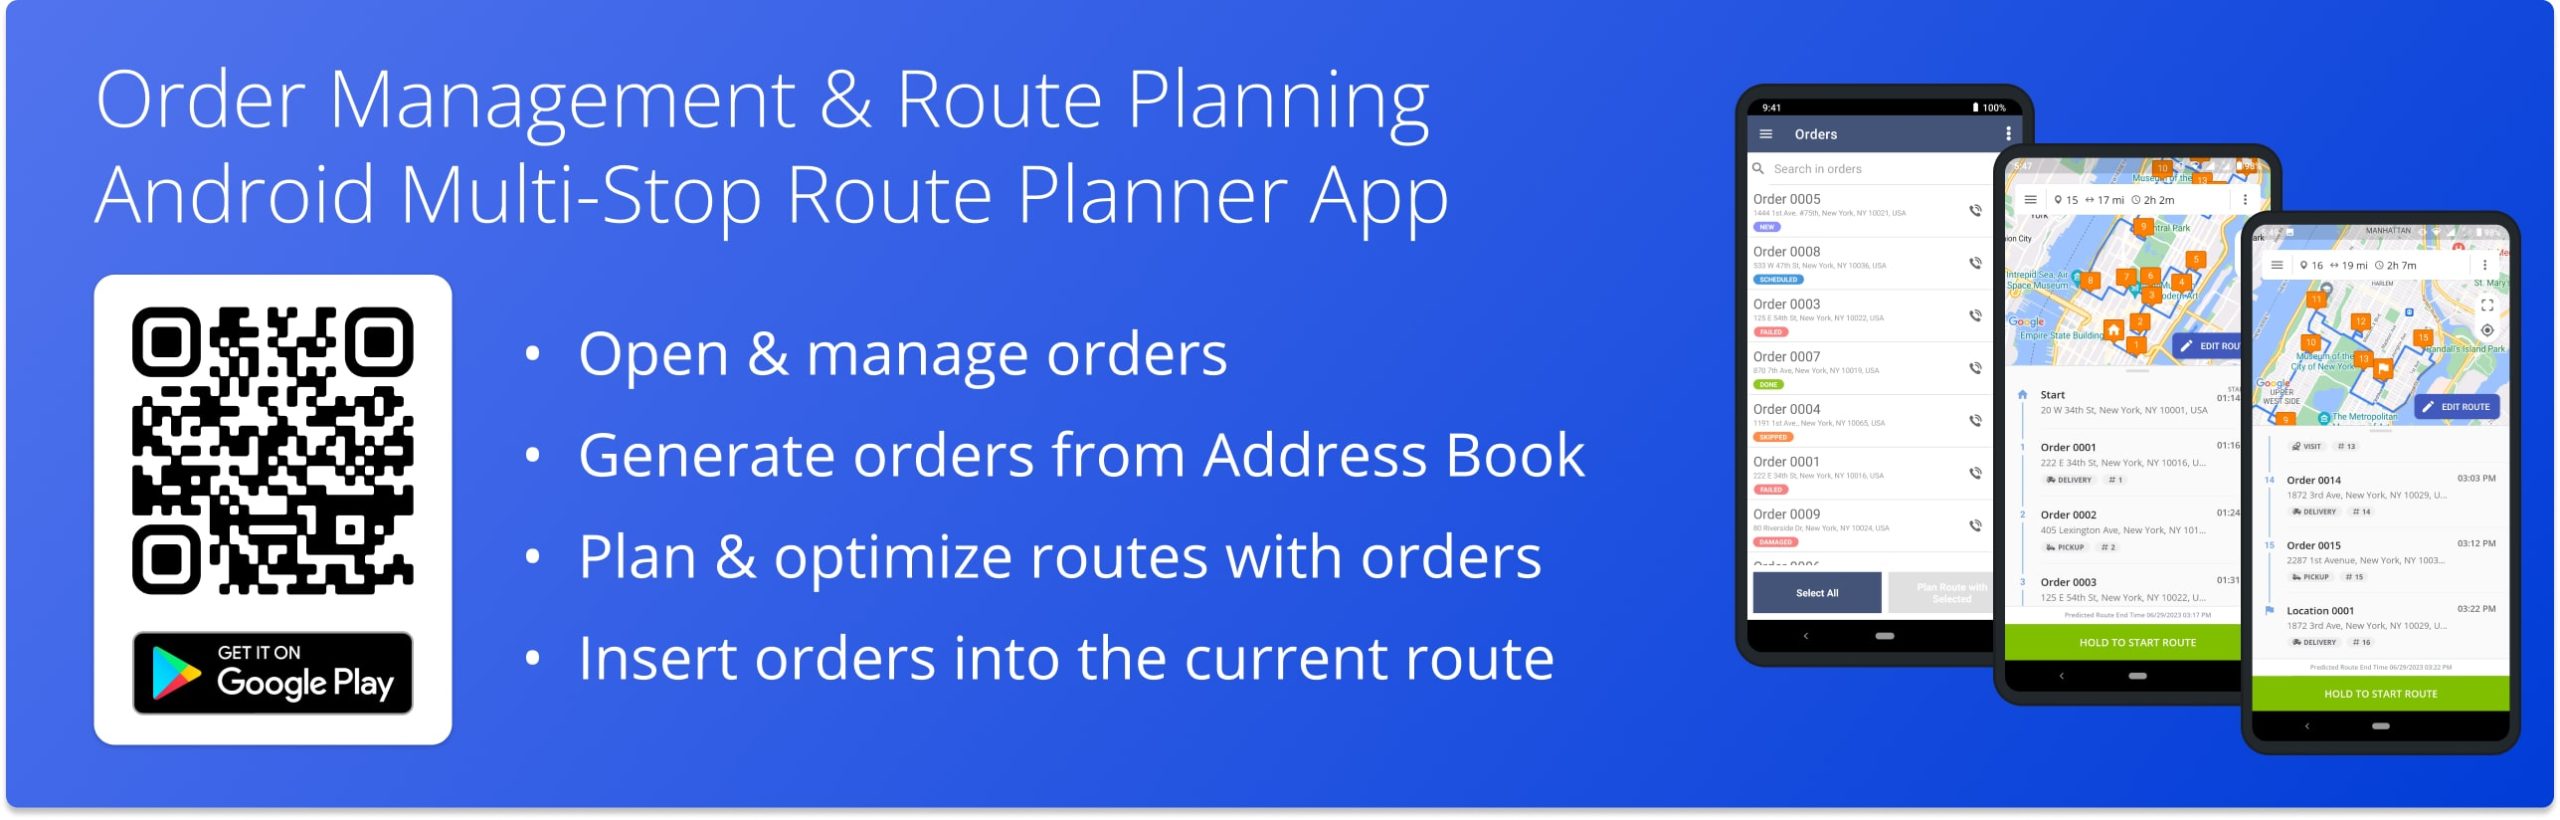 Manage orders, optimize routes with orders, and insert orders into planned routes on Route4Me's Android Route Planner app.